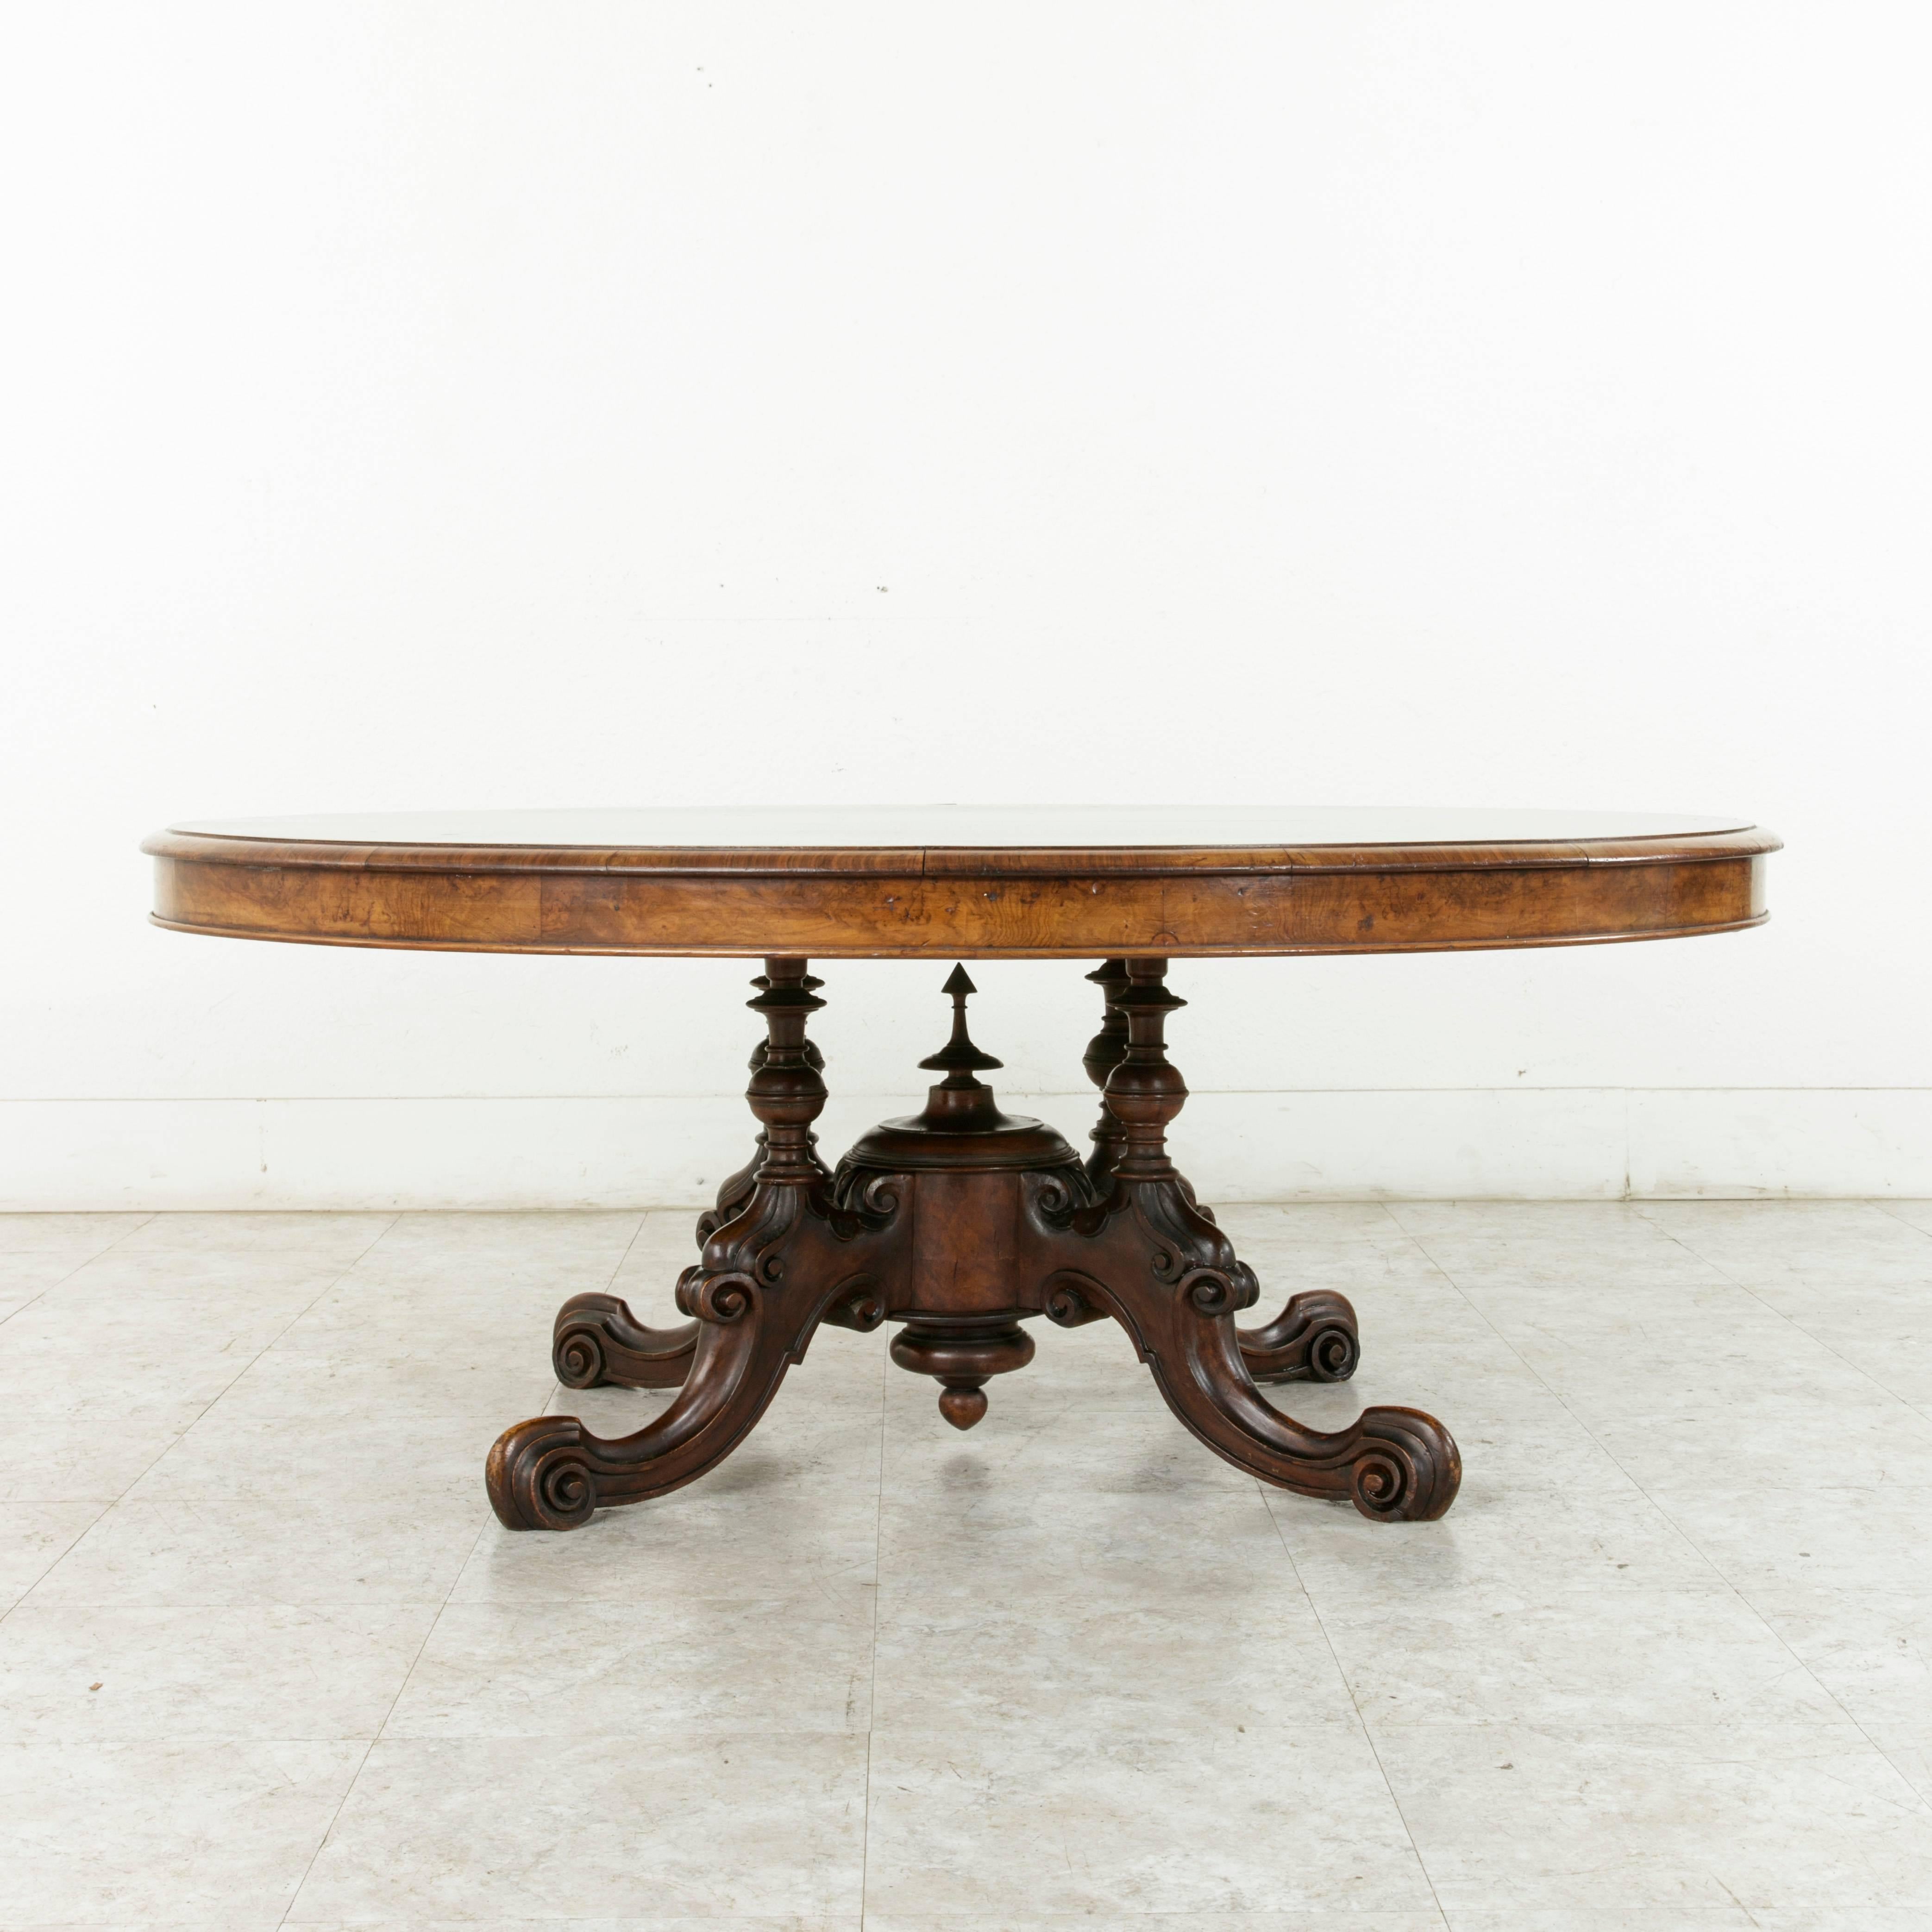 Late 19th Century 19th Century Burl Walnut and Marquetry English Loo Table or Coffee Table